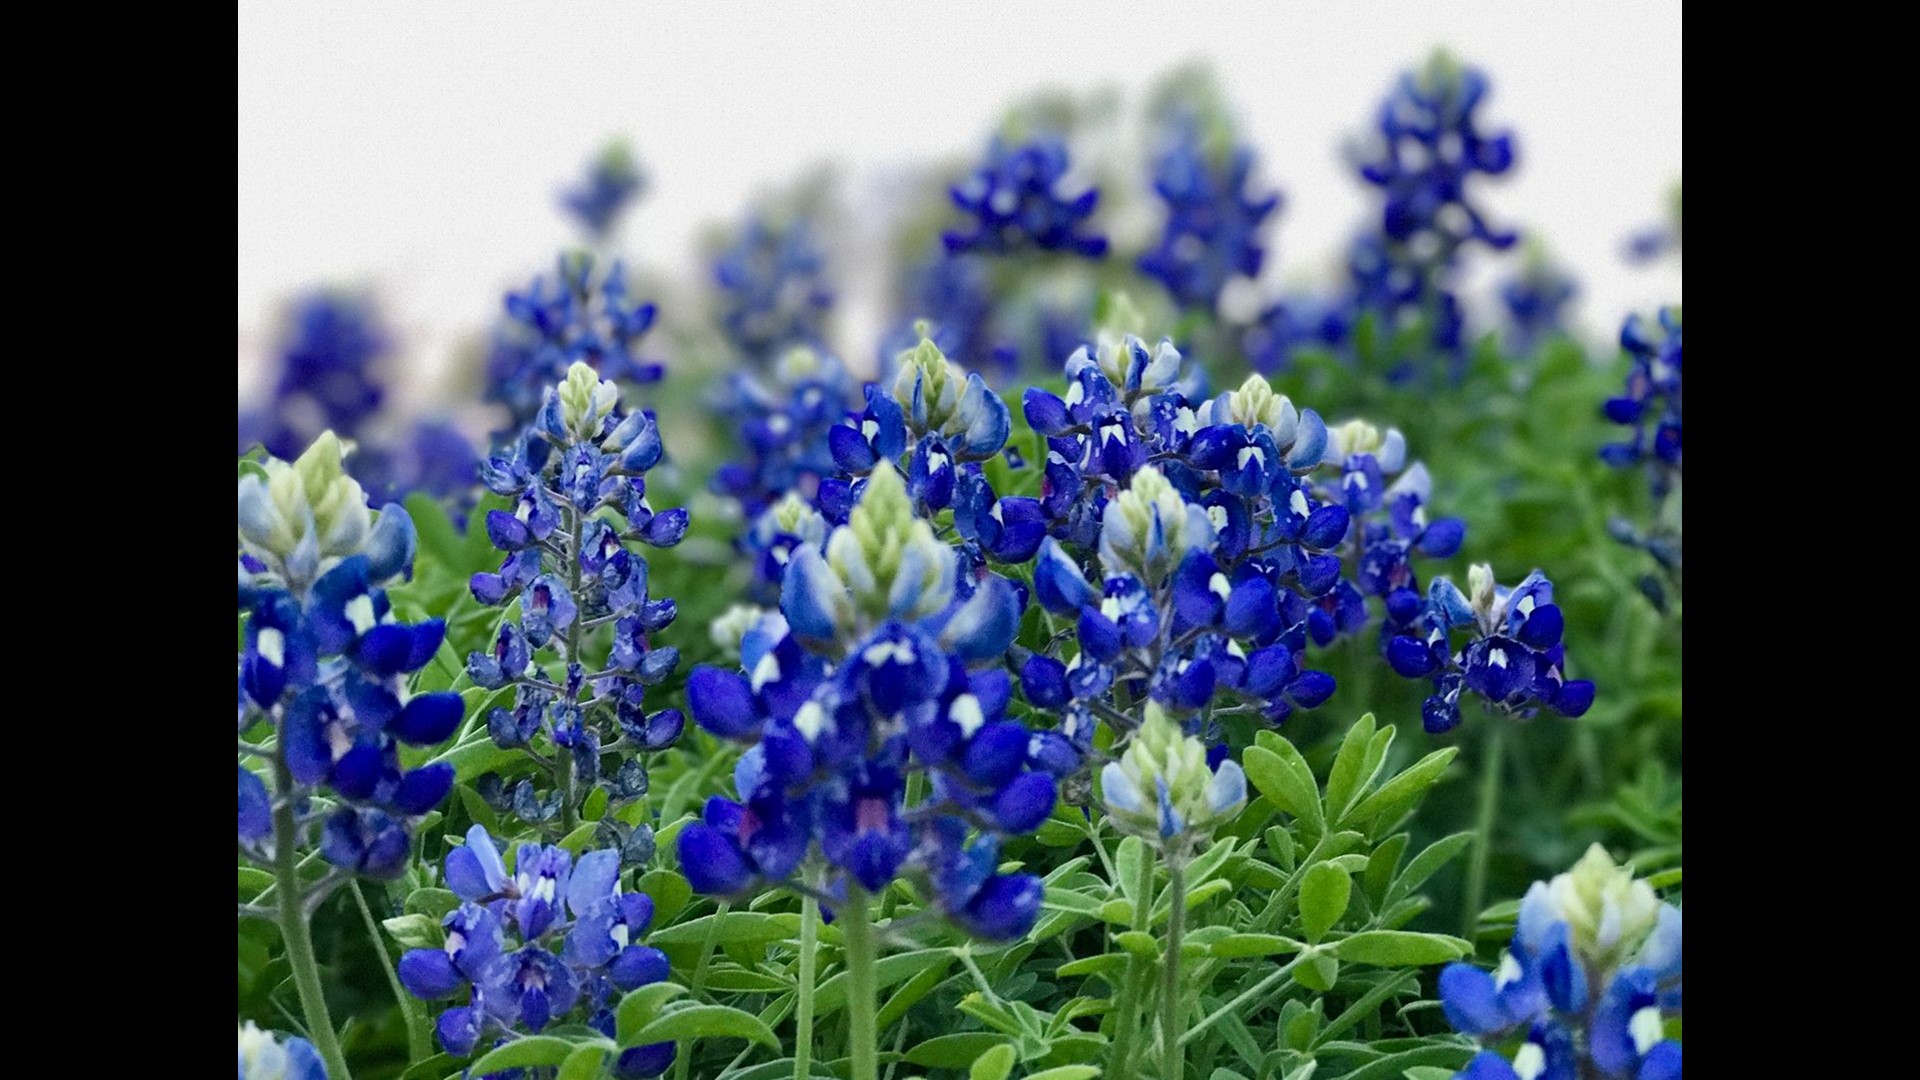 Spring has sprung, and bluebonnet season is in full force. If you grew up in the Lone Star State, there's a chance you've been told picking the flower is illegal. Is this true?